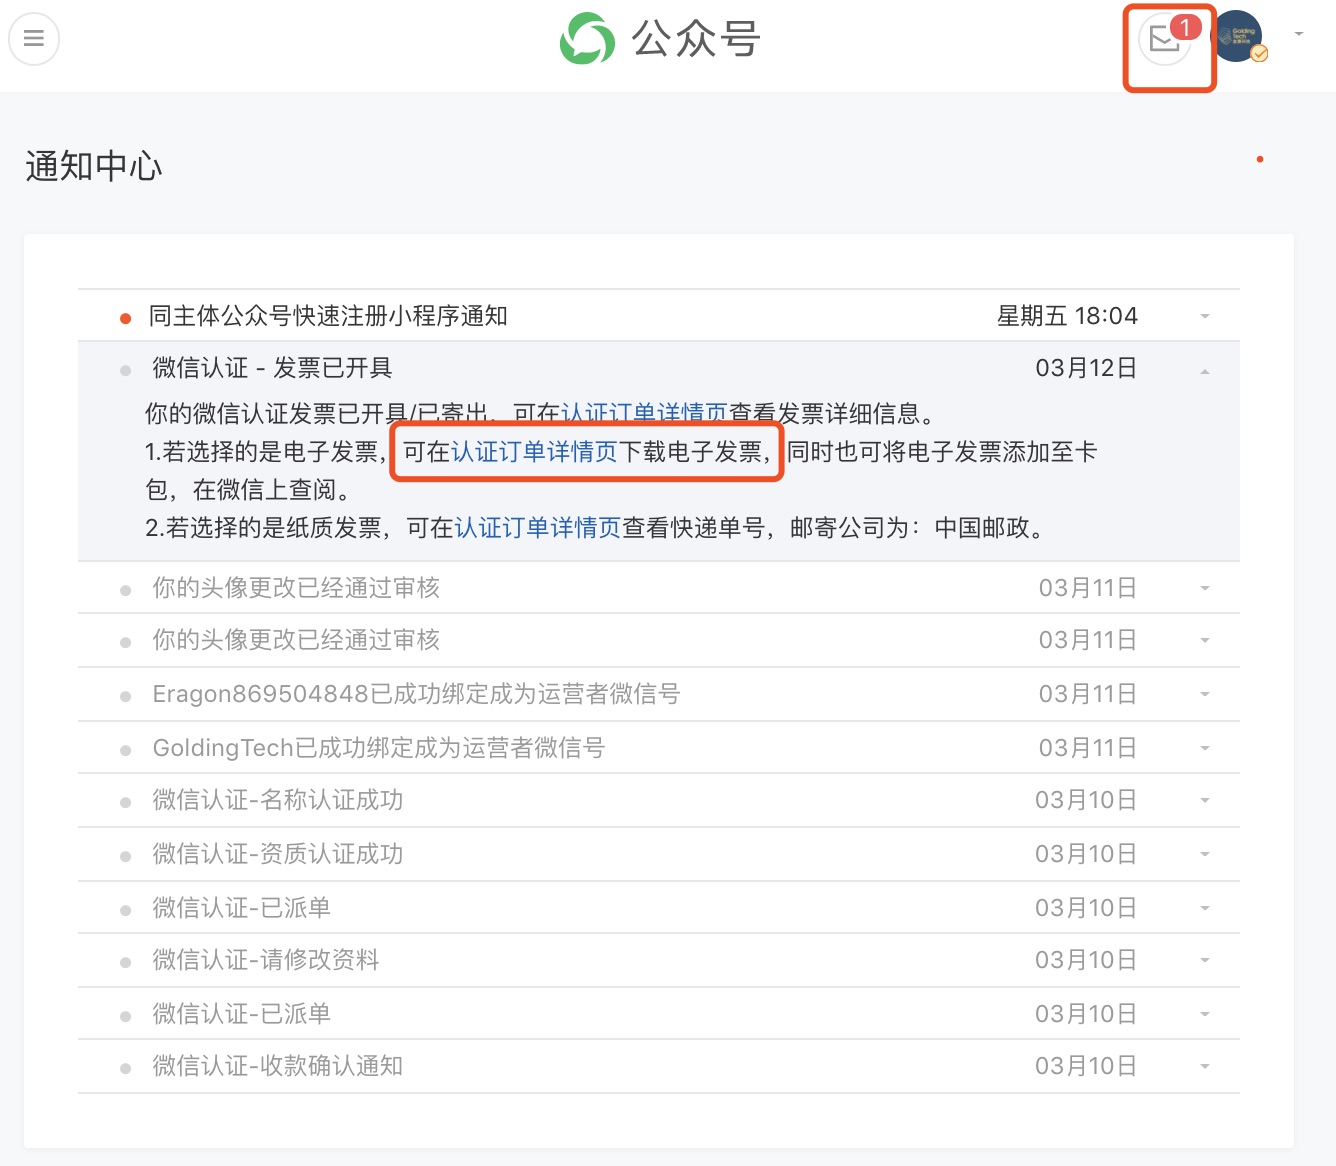 Apply Wechat Public Account in three steps